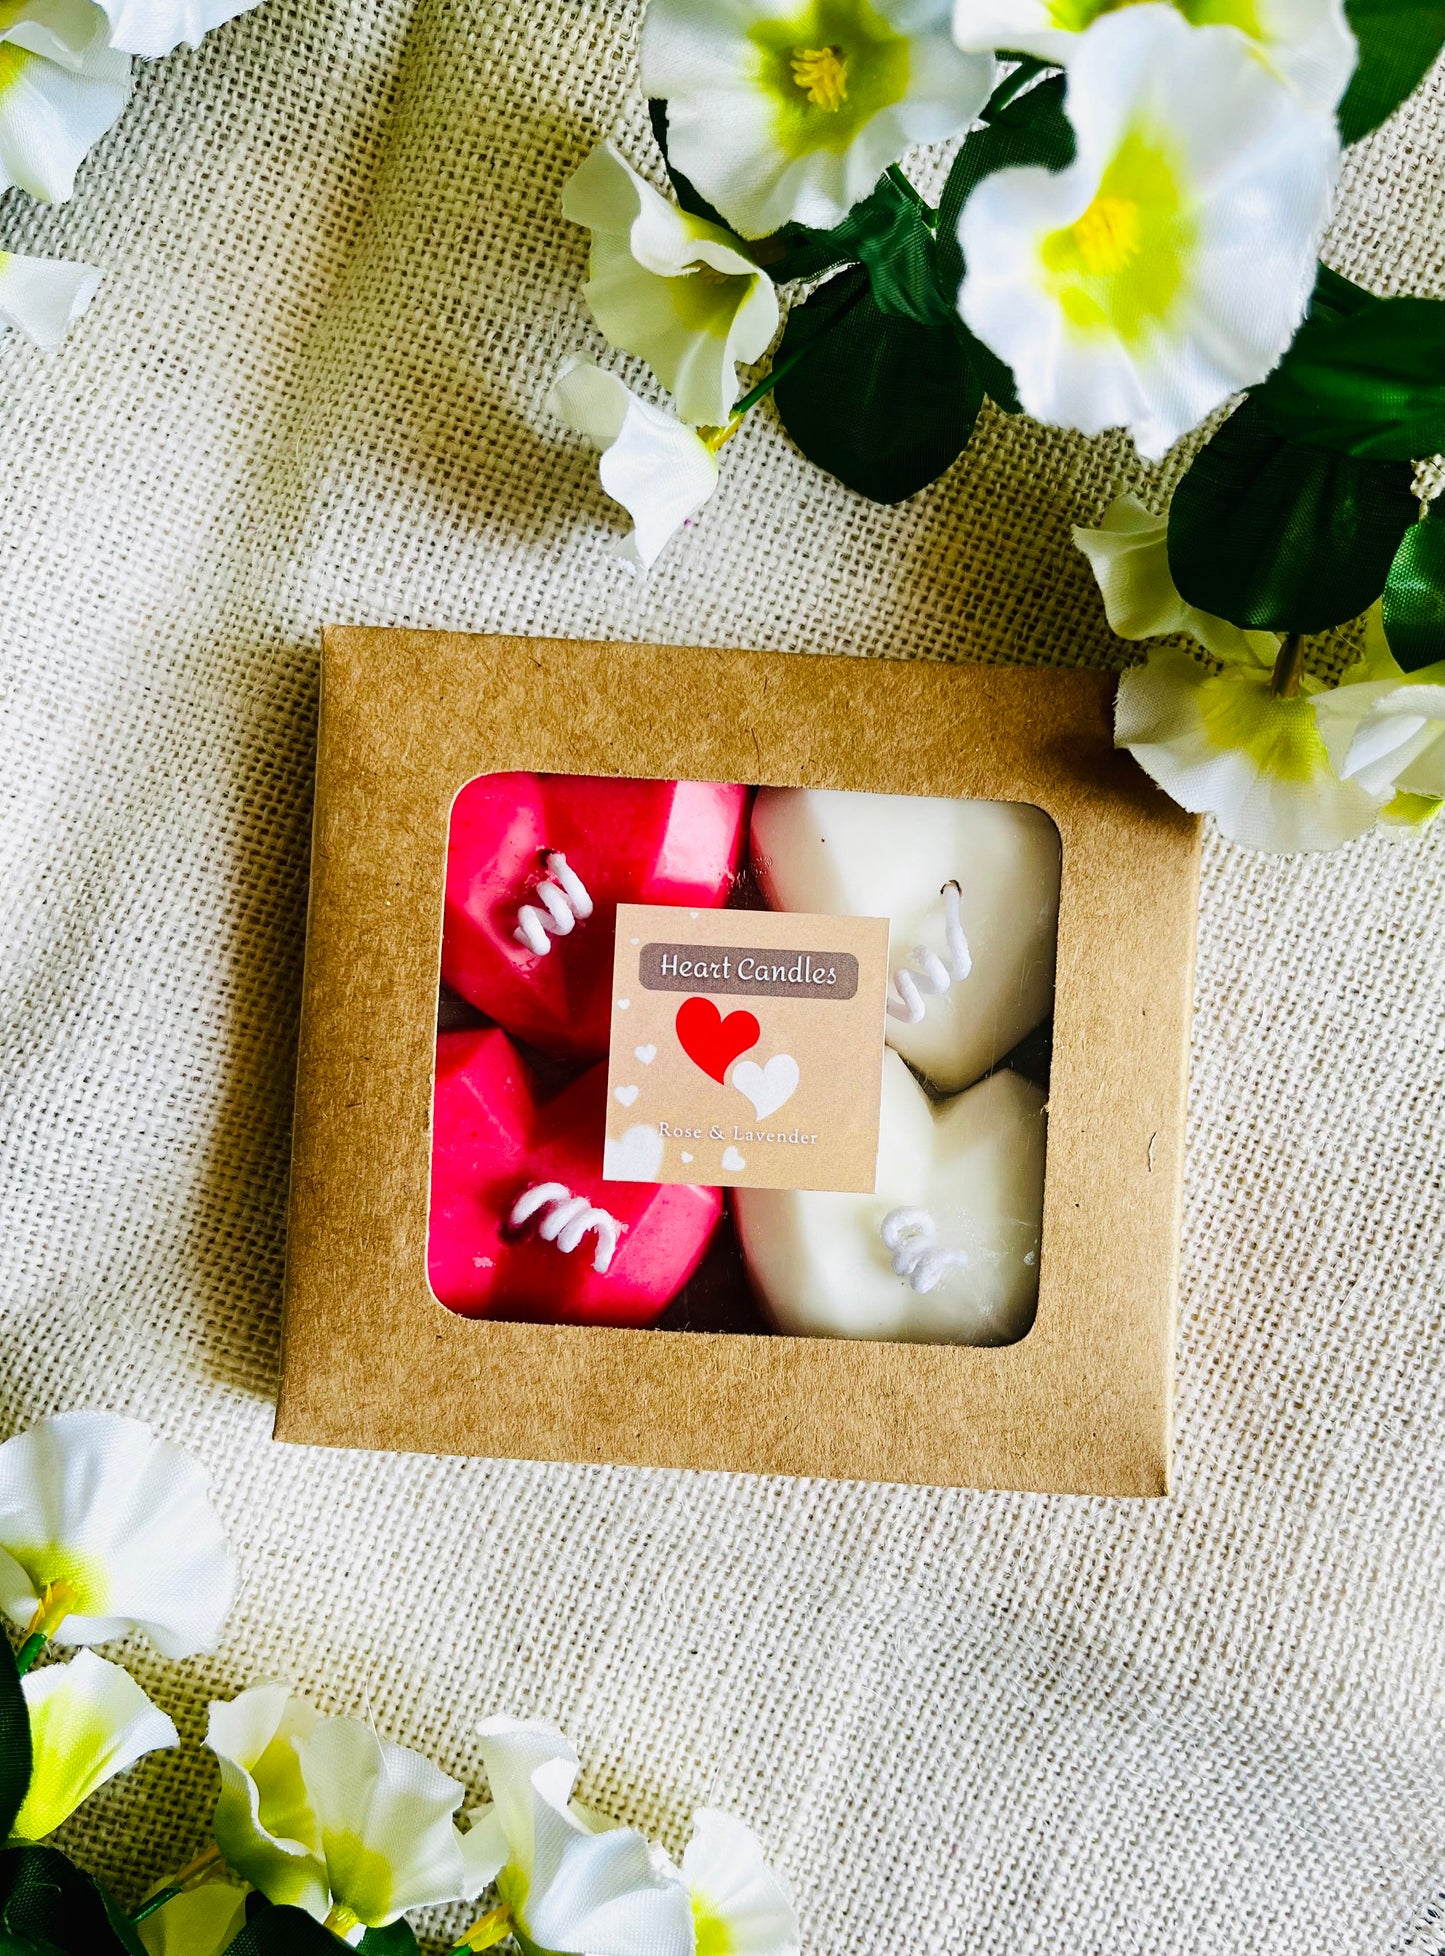 4Ever Love Hearts Candle Box